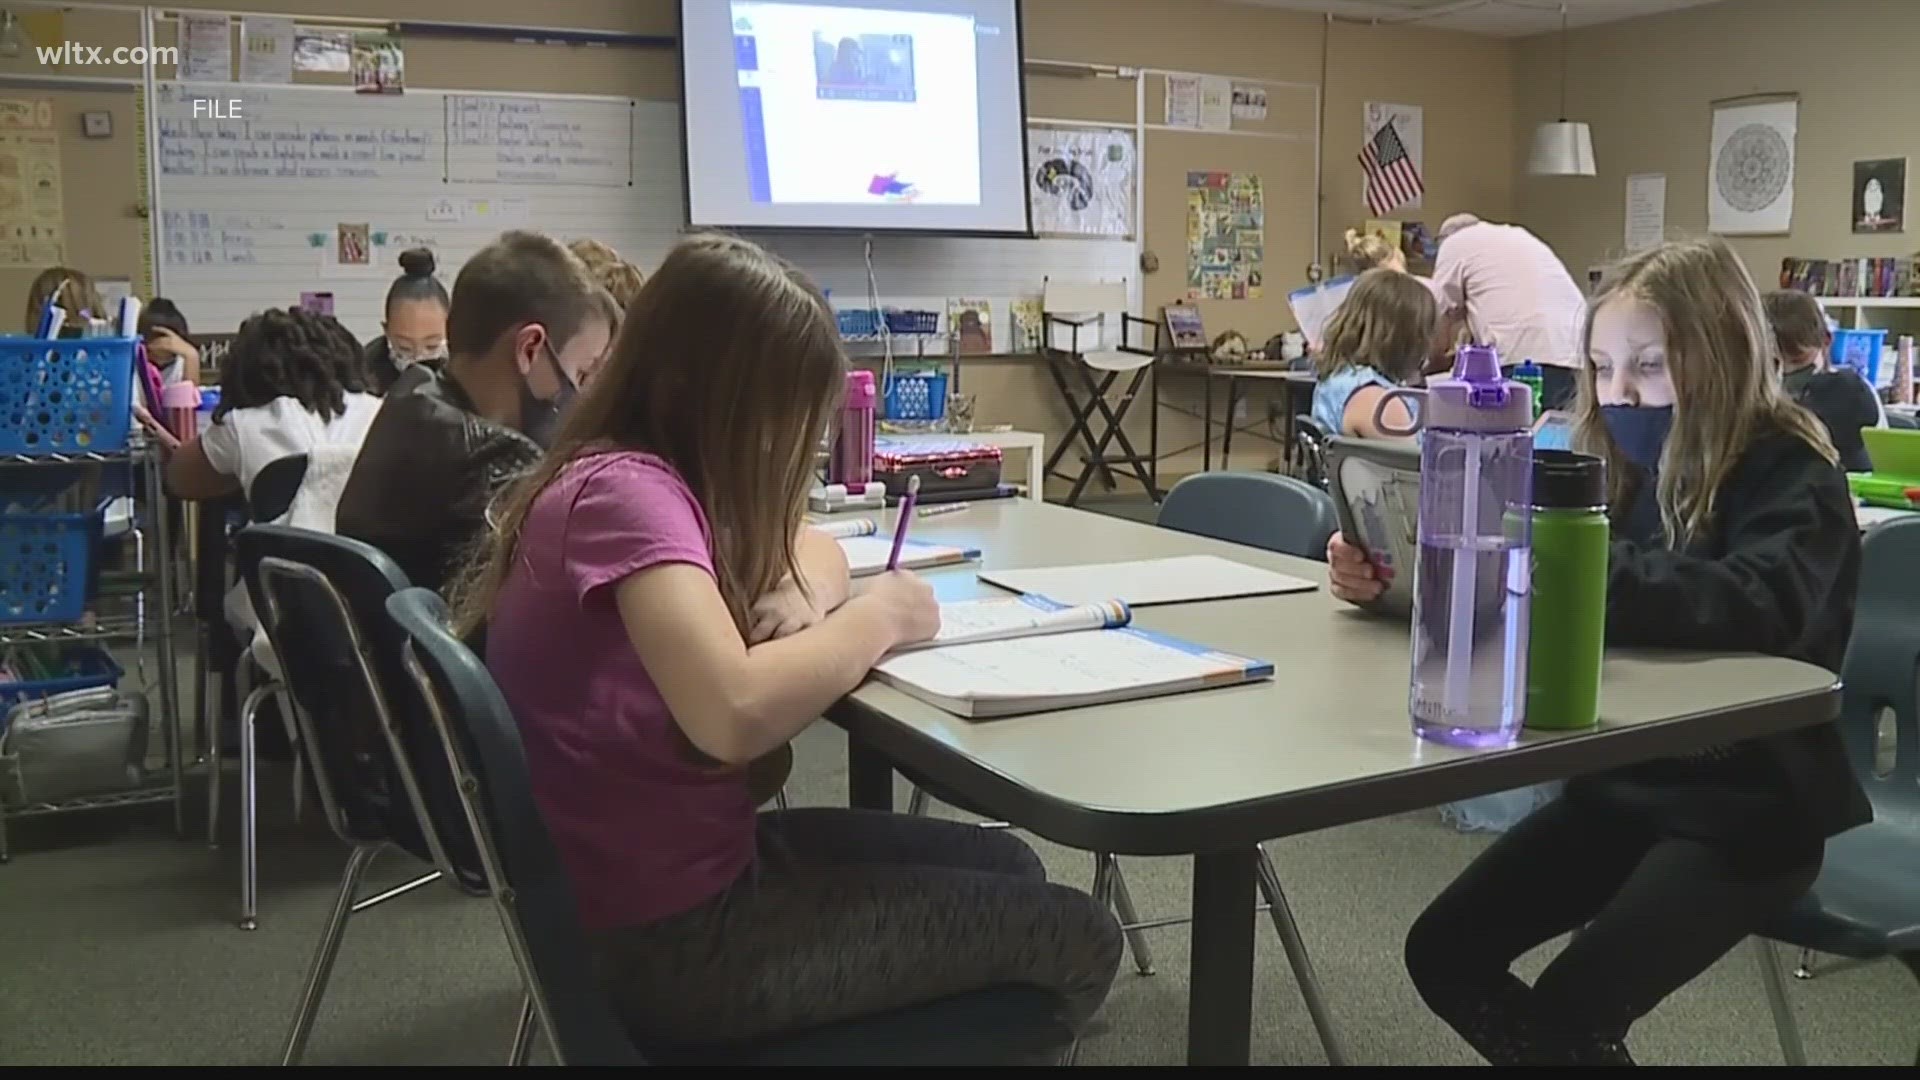 The state's standardized test scores for last school year have come out and leaders say it's encouraging but more work needs to be done.